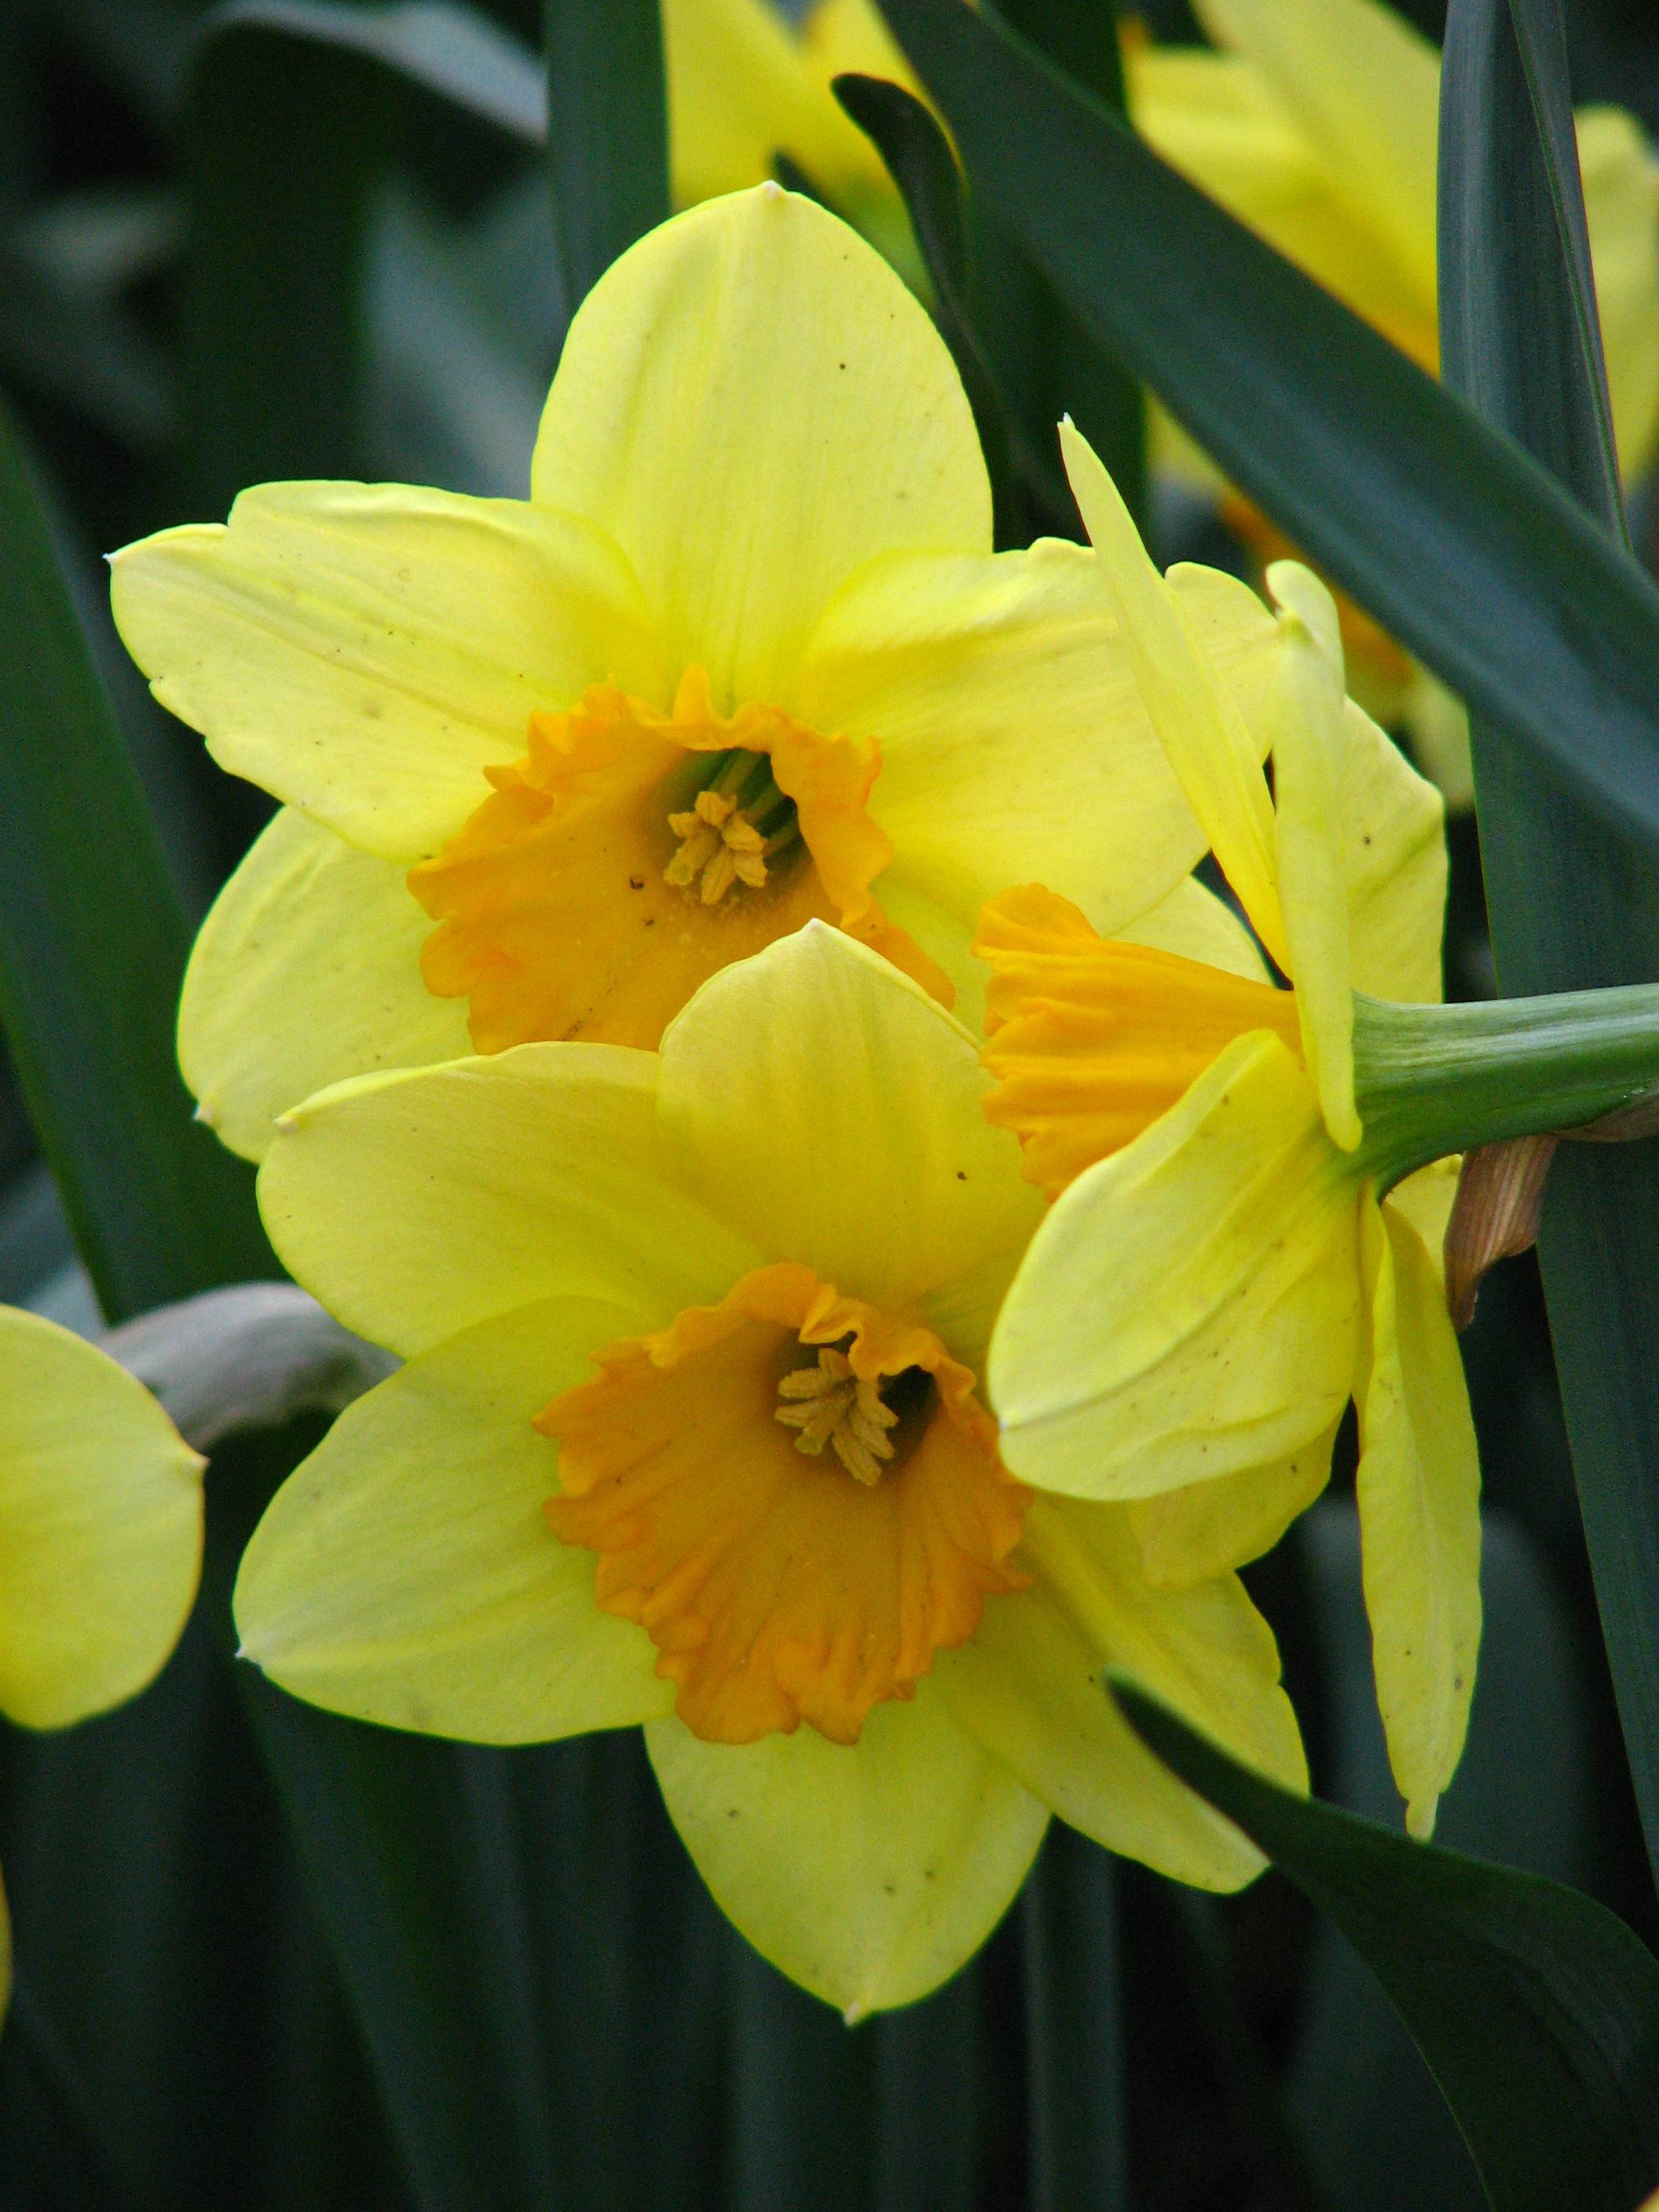 yellow flowers with light-orange center, lime filaments, yellow anthers, dark-green leaves and stems